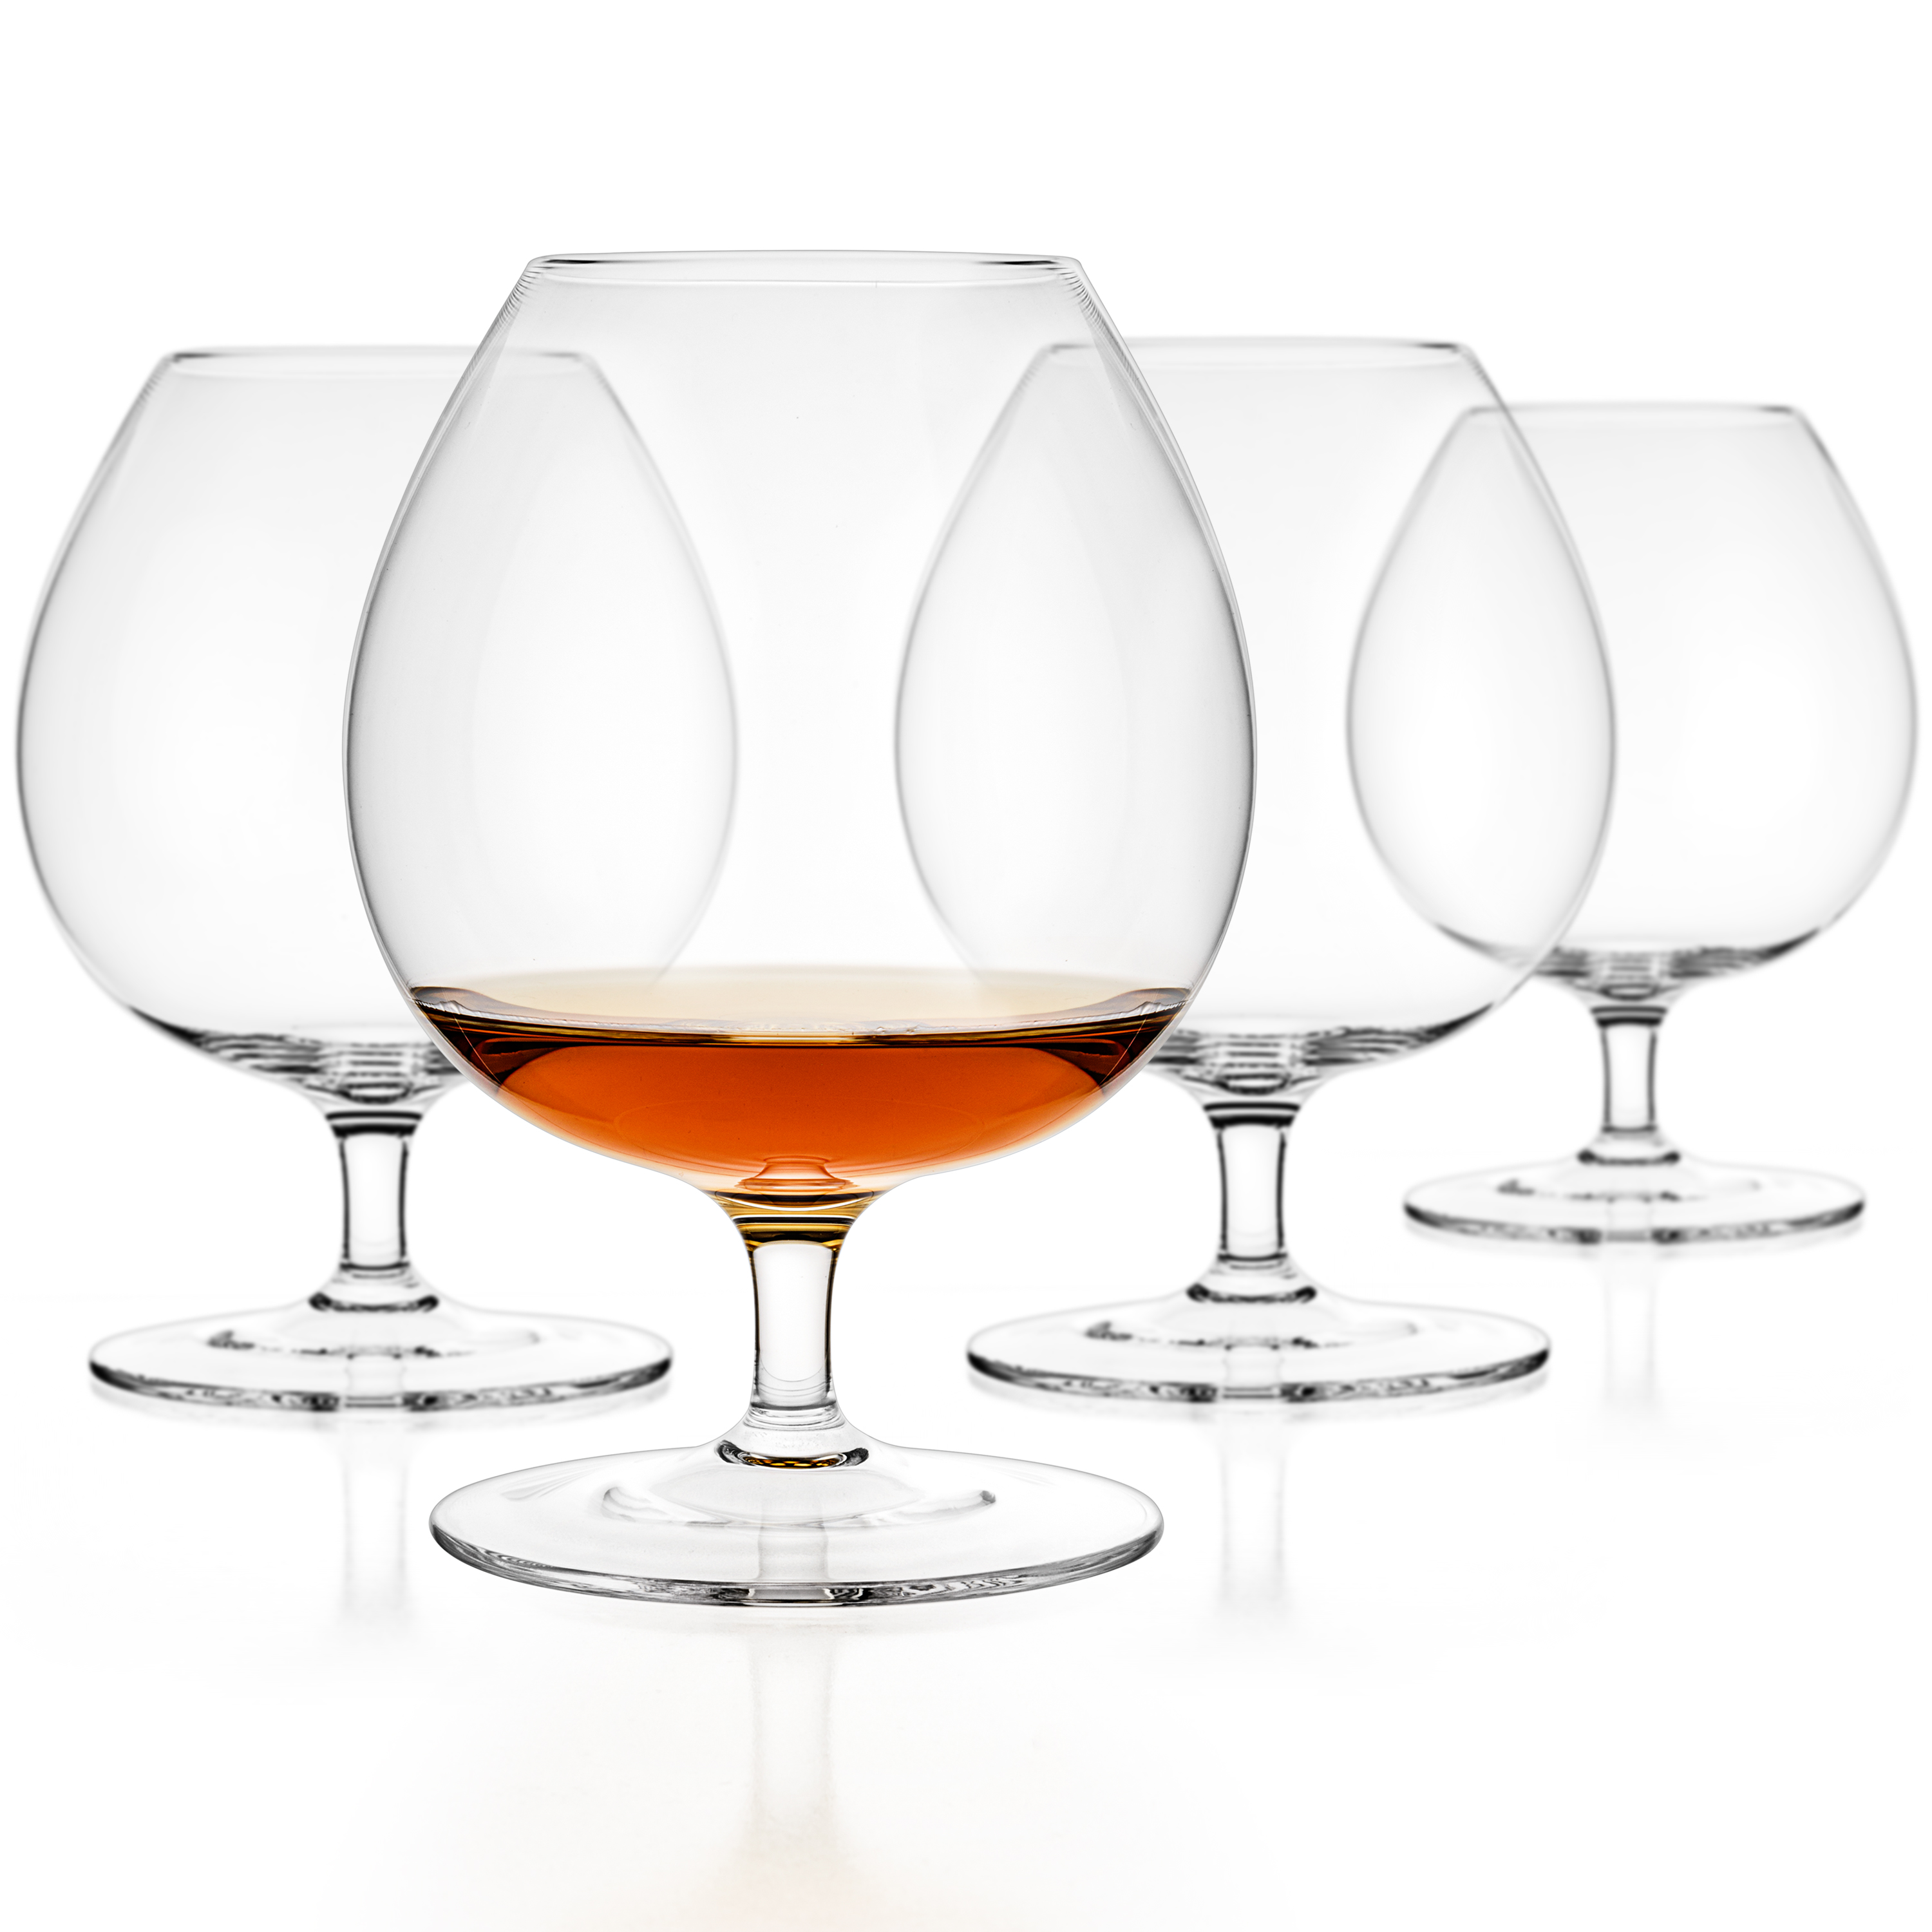 https://www.luxbe.com/images/detailed/4/scotch-and-whiskey-glasses-clone_zqvp-eq.jpg